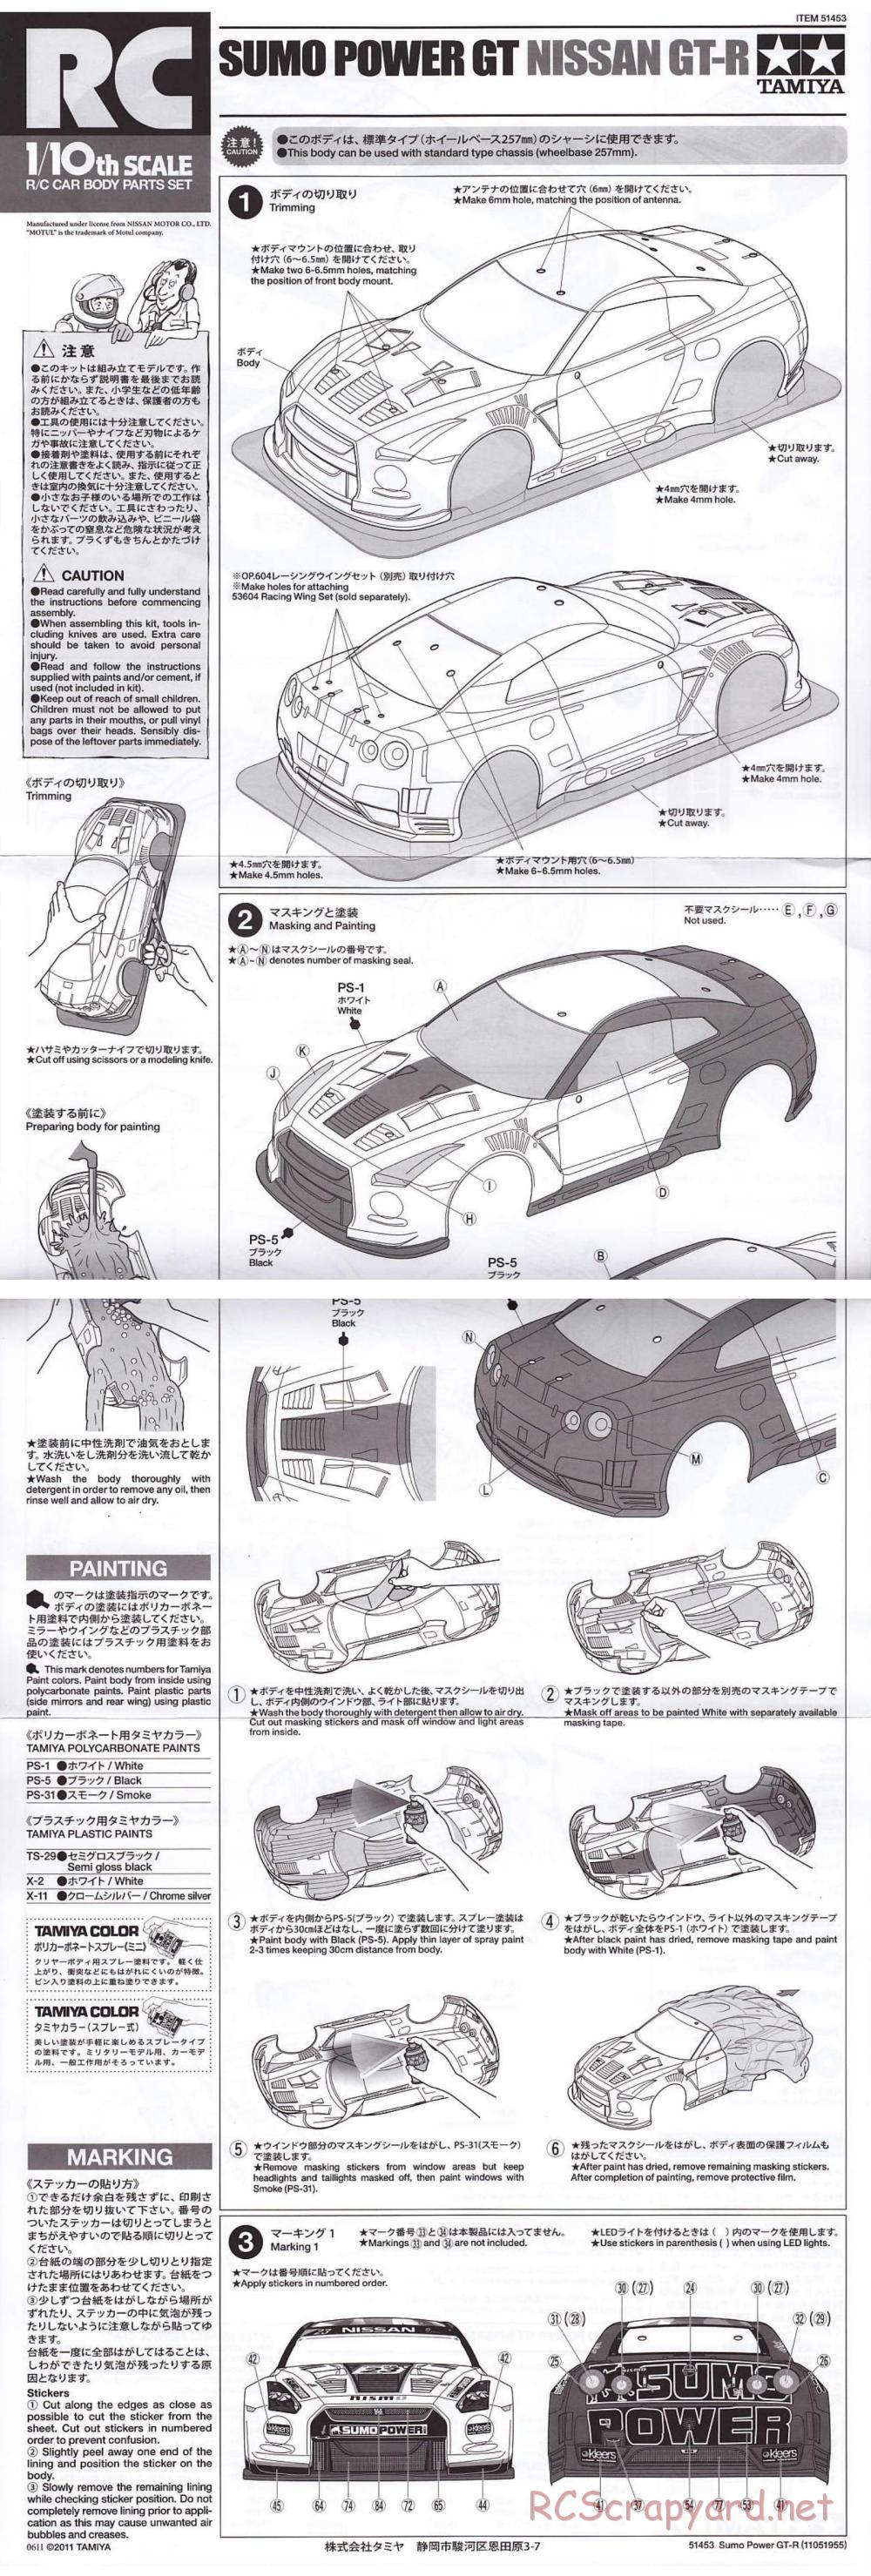 Tamiya - Sumo Power GT Nissan GT-R - TA06 Chassis - Body Manual - Page 1